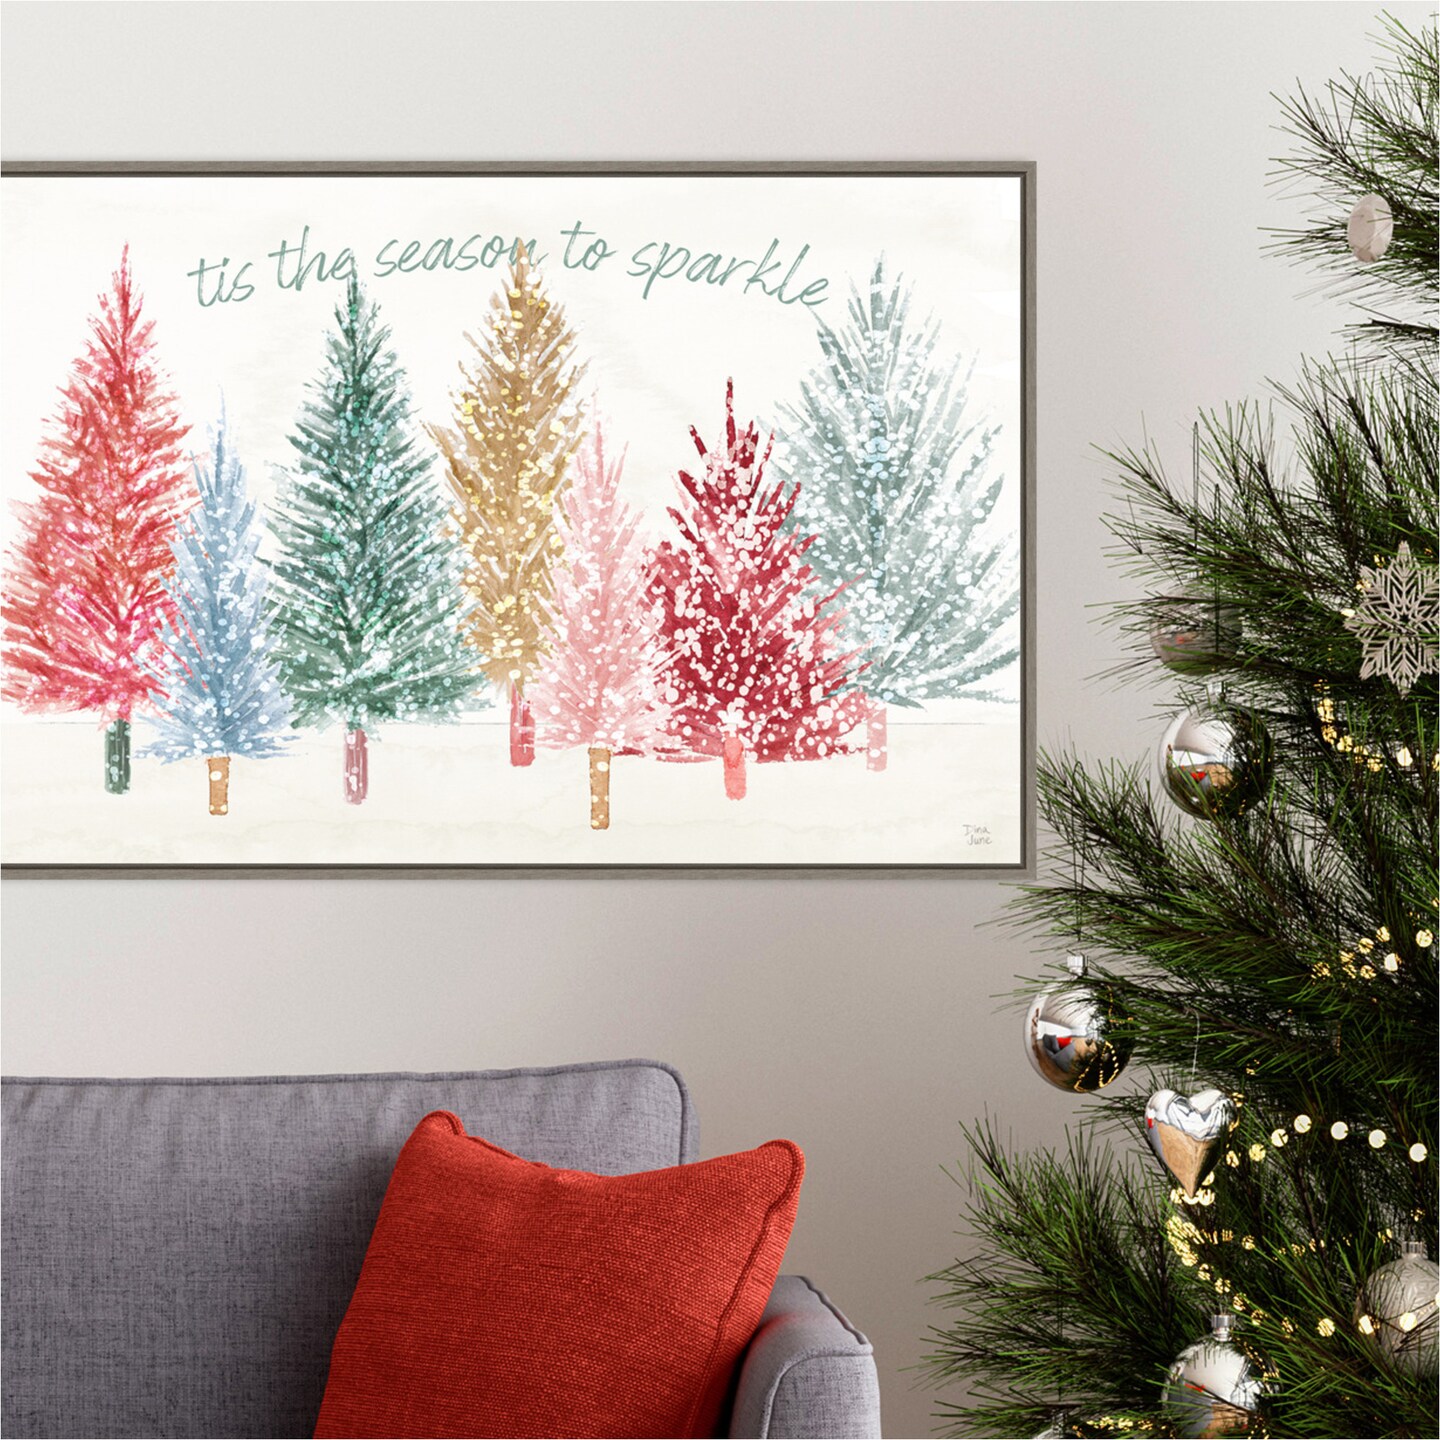 Holiday Sparkle I by Dina June 33-in. W x 23-in. H. Canvas Wall Art Print Framed in Grey